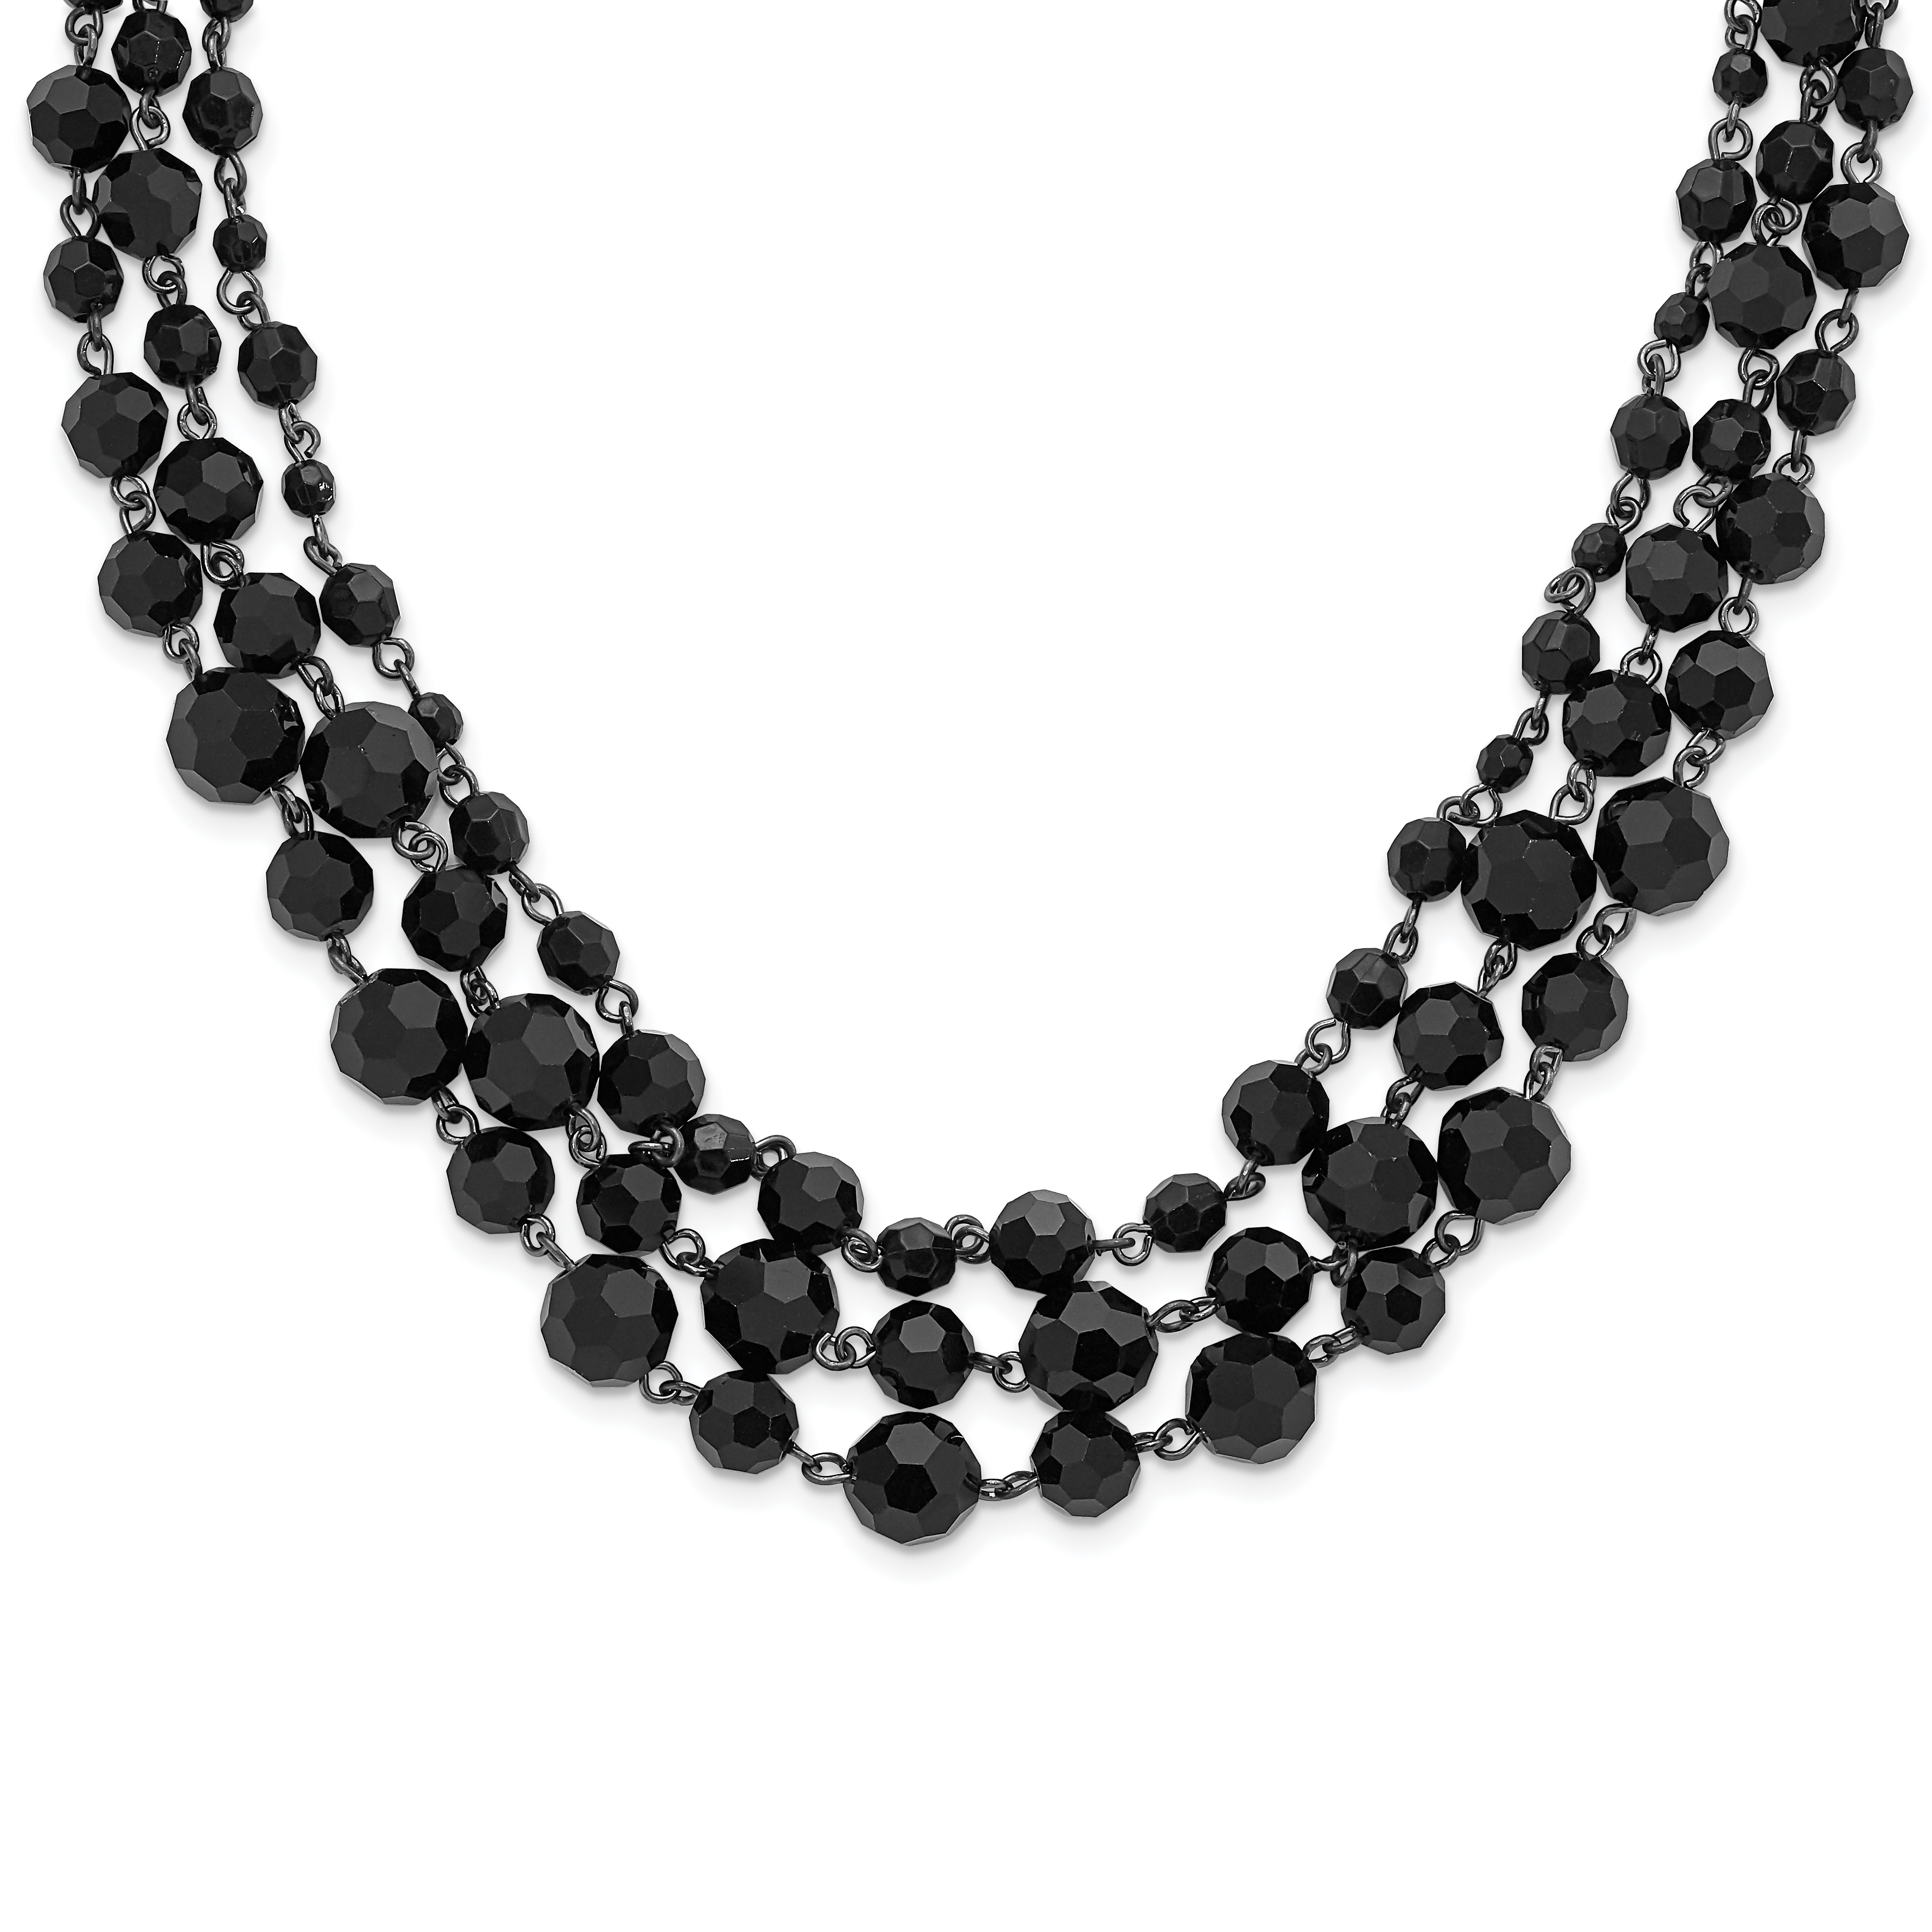 Black-plated Black Glass Beads 16in w/3in ext Necklace BF1764 | eBay